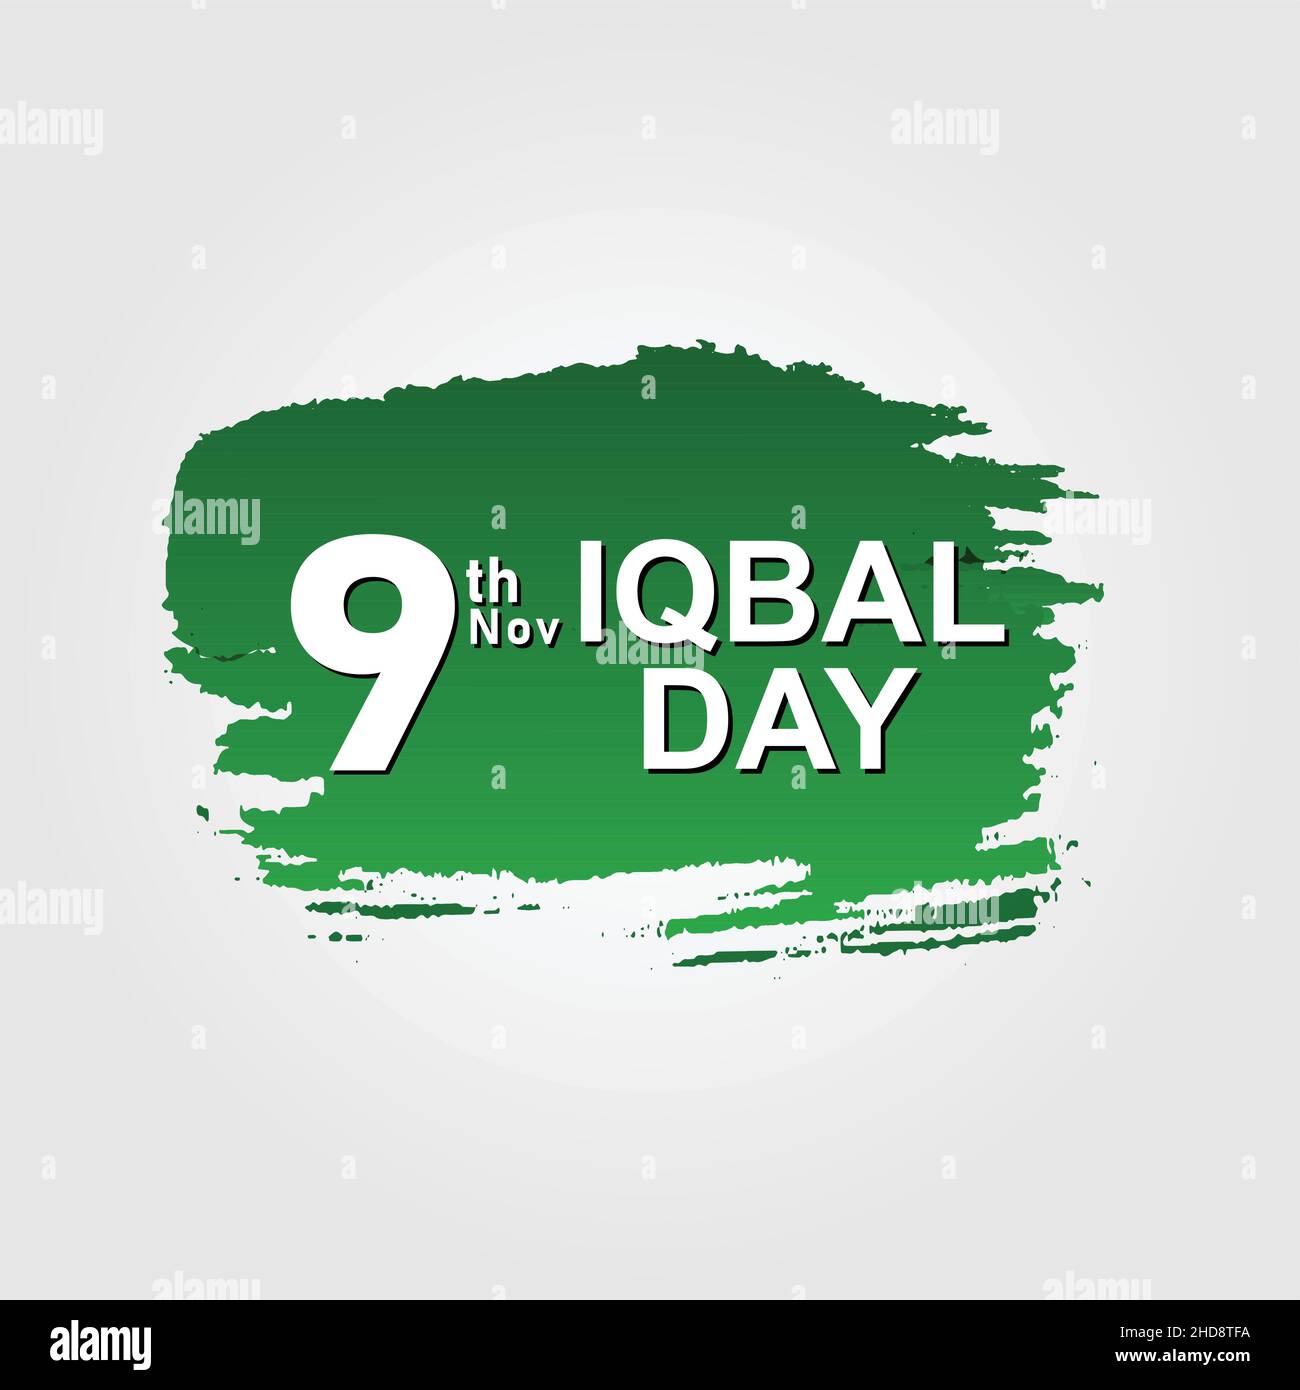 English language written 9th November Allama iqbal day on green gradient color with white background Stock Vector